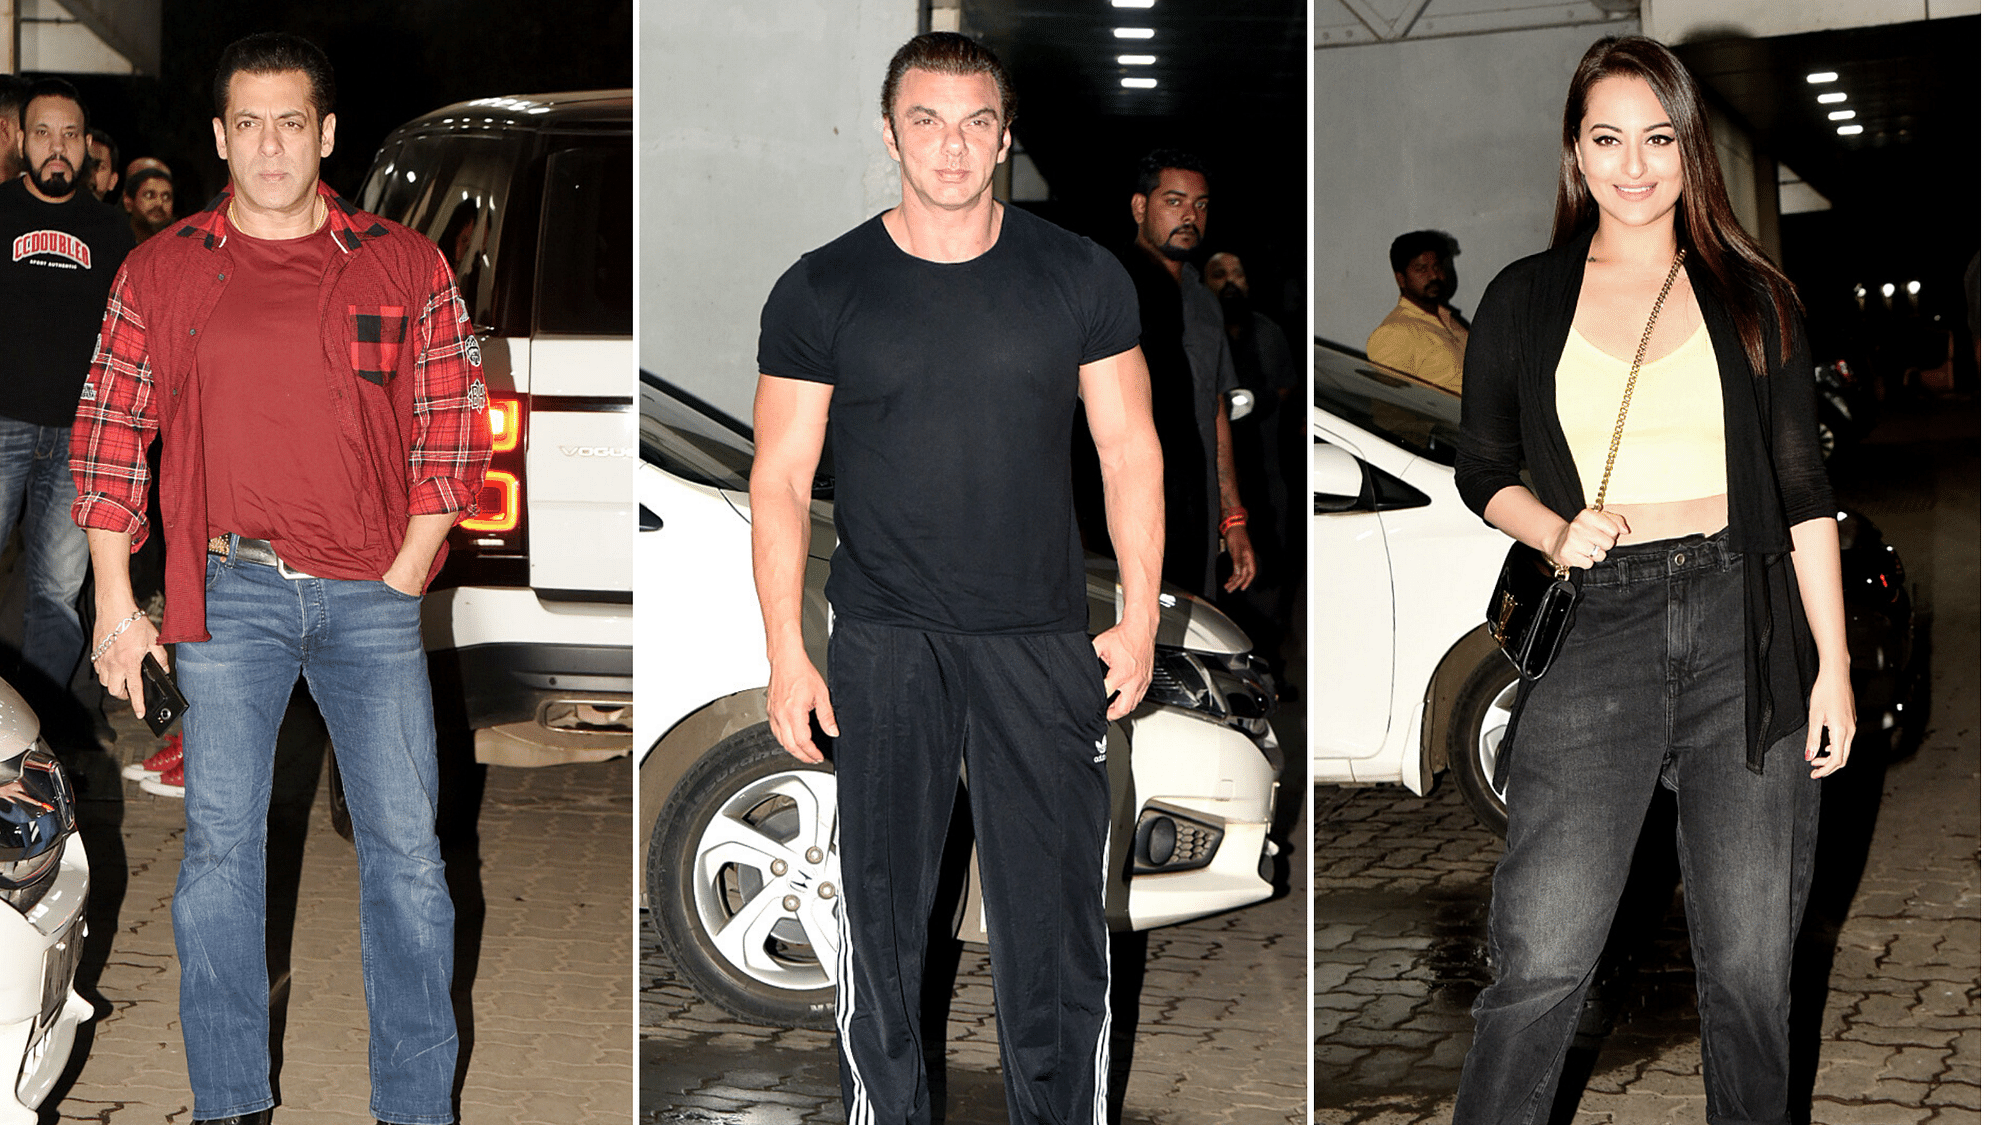 Salman Khan and Sonakshi Sinha were present at Sohail Khan’s party among others.